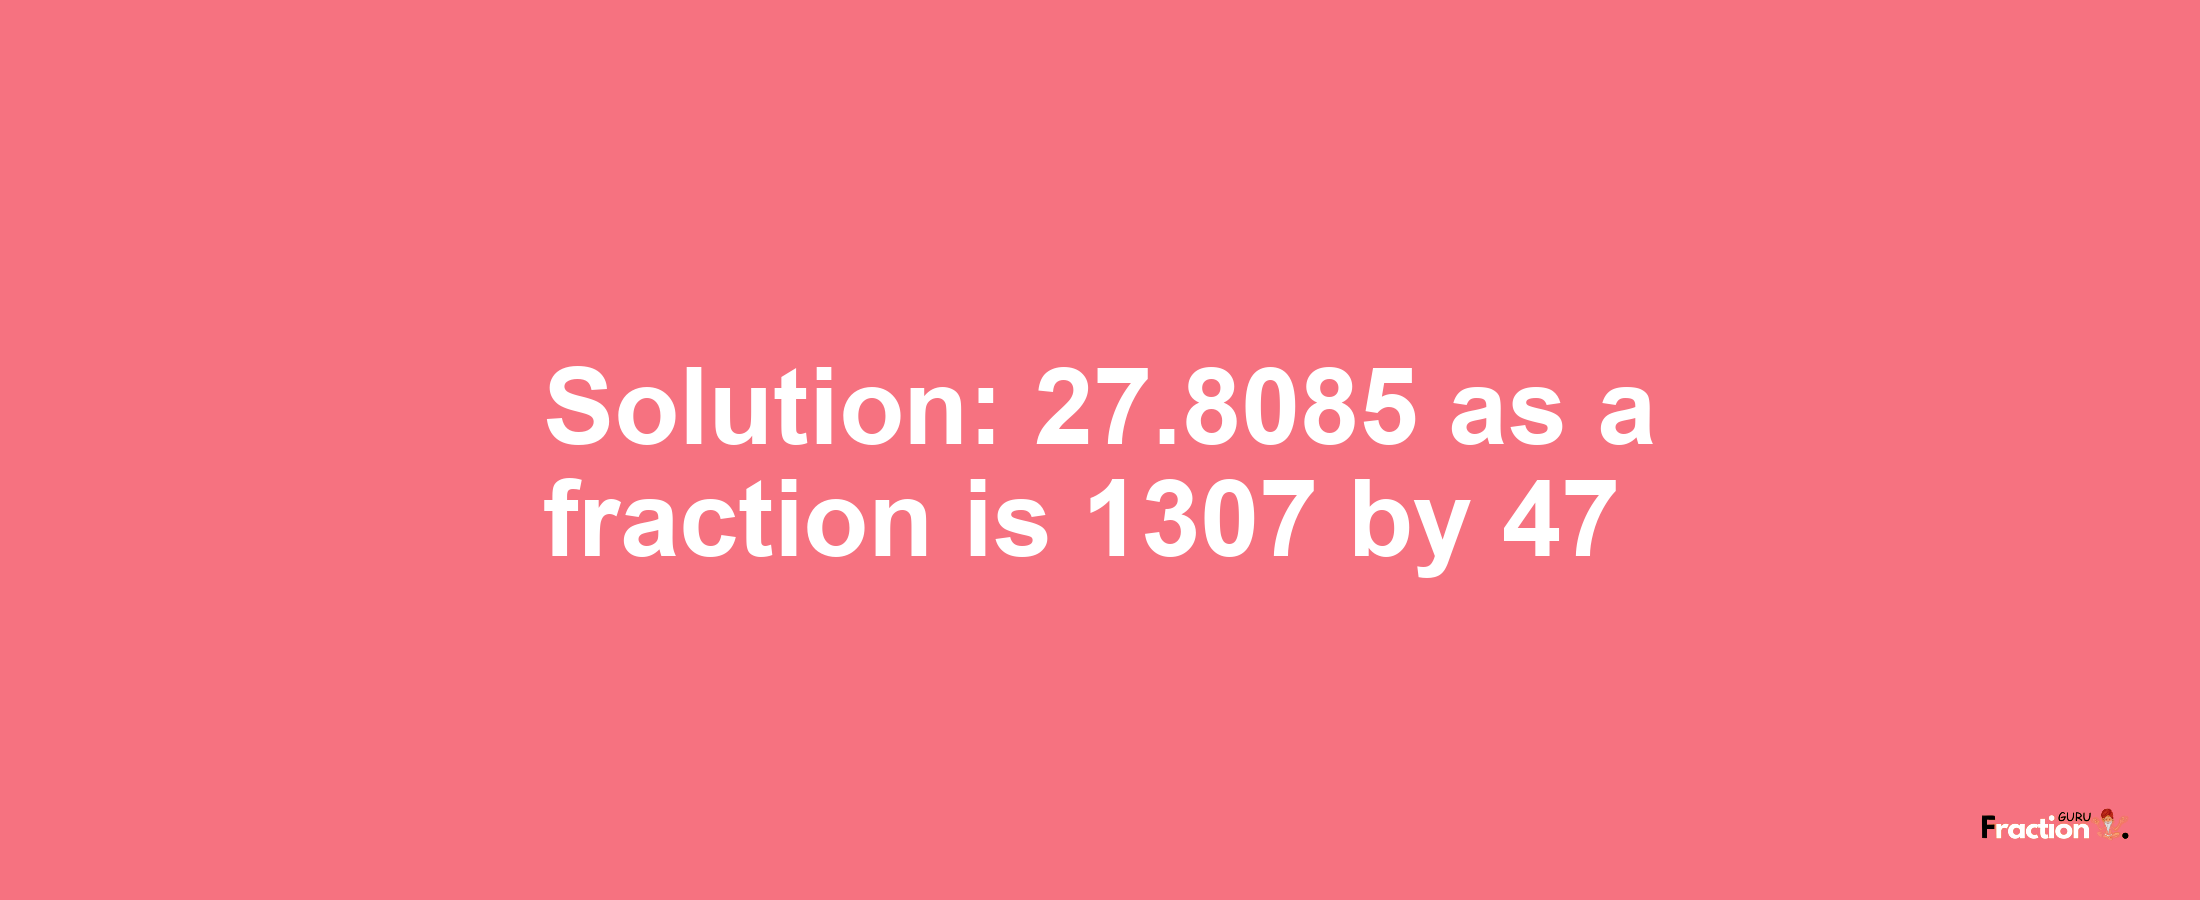 Solution:27.8085 as a fraction is 1307/47